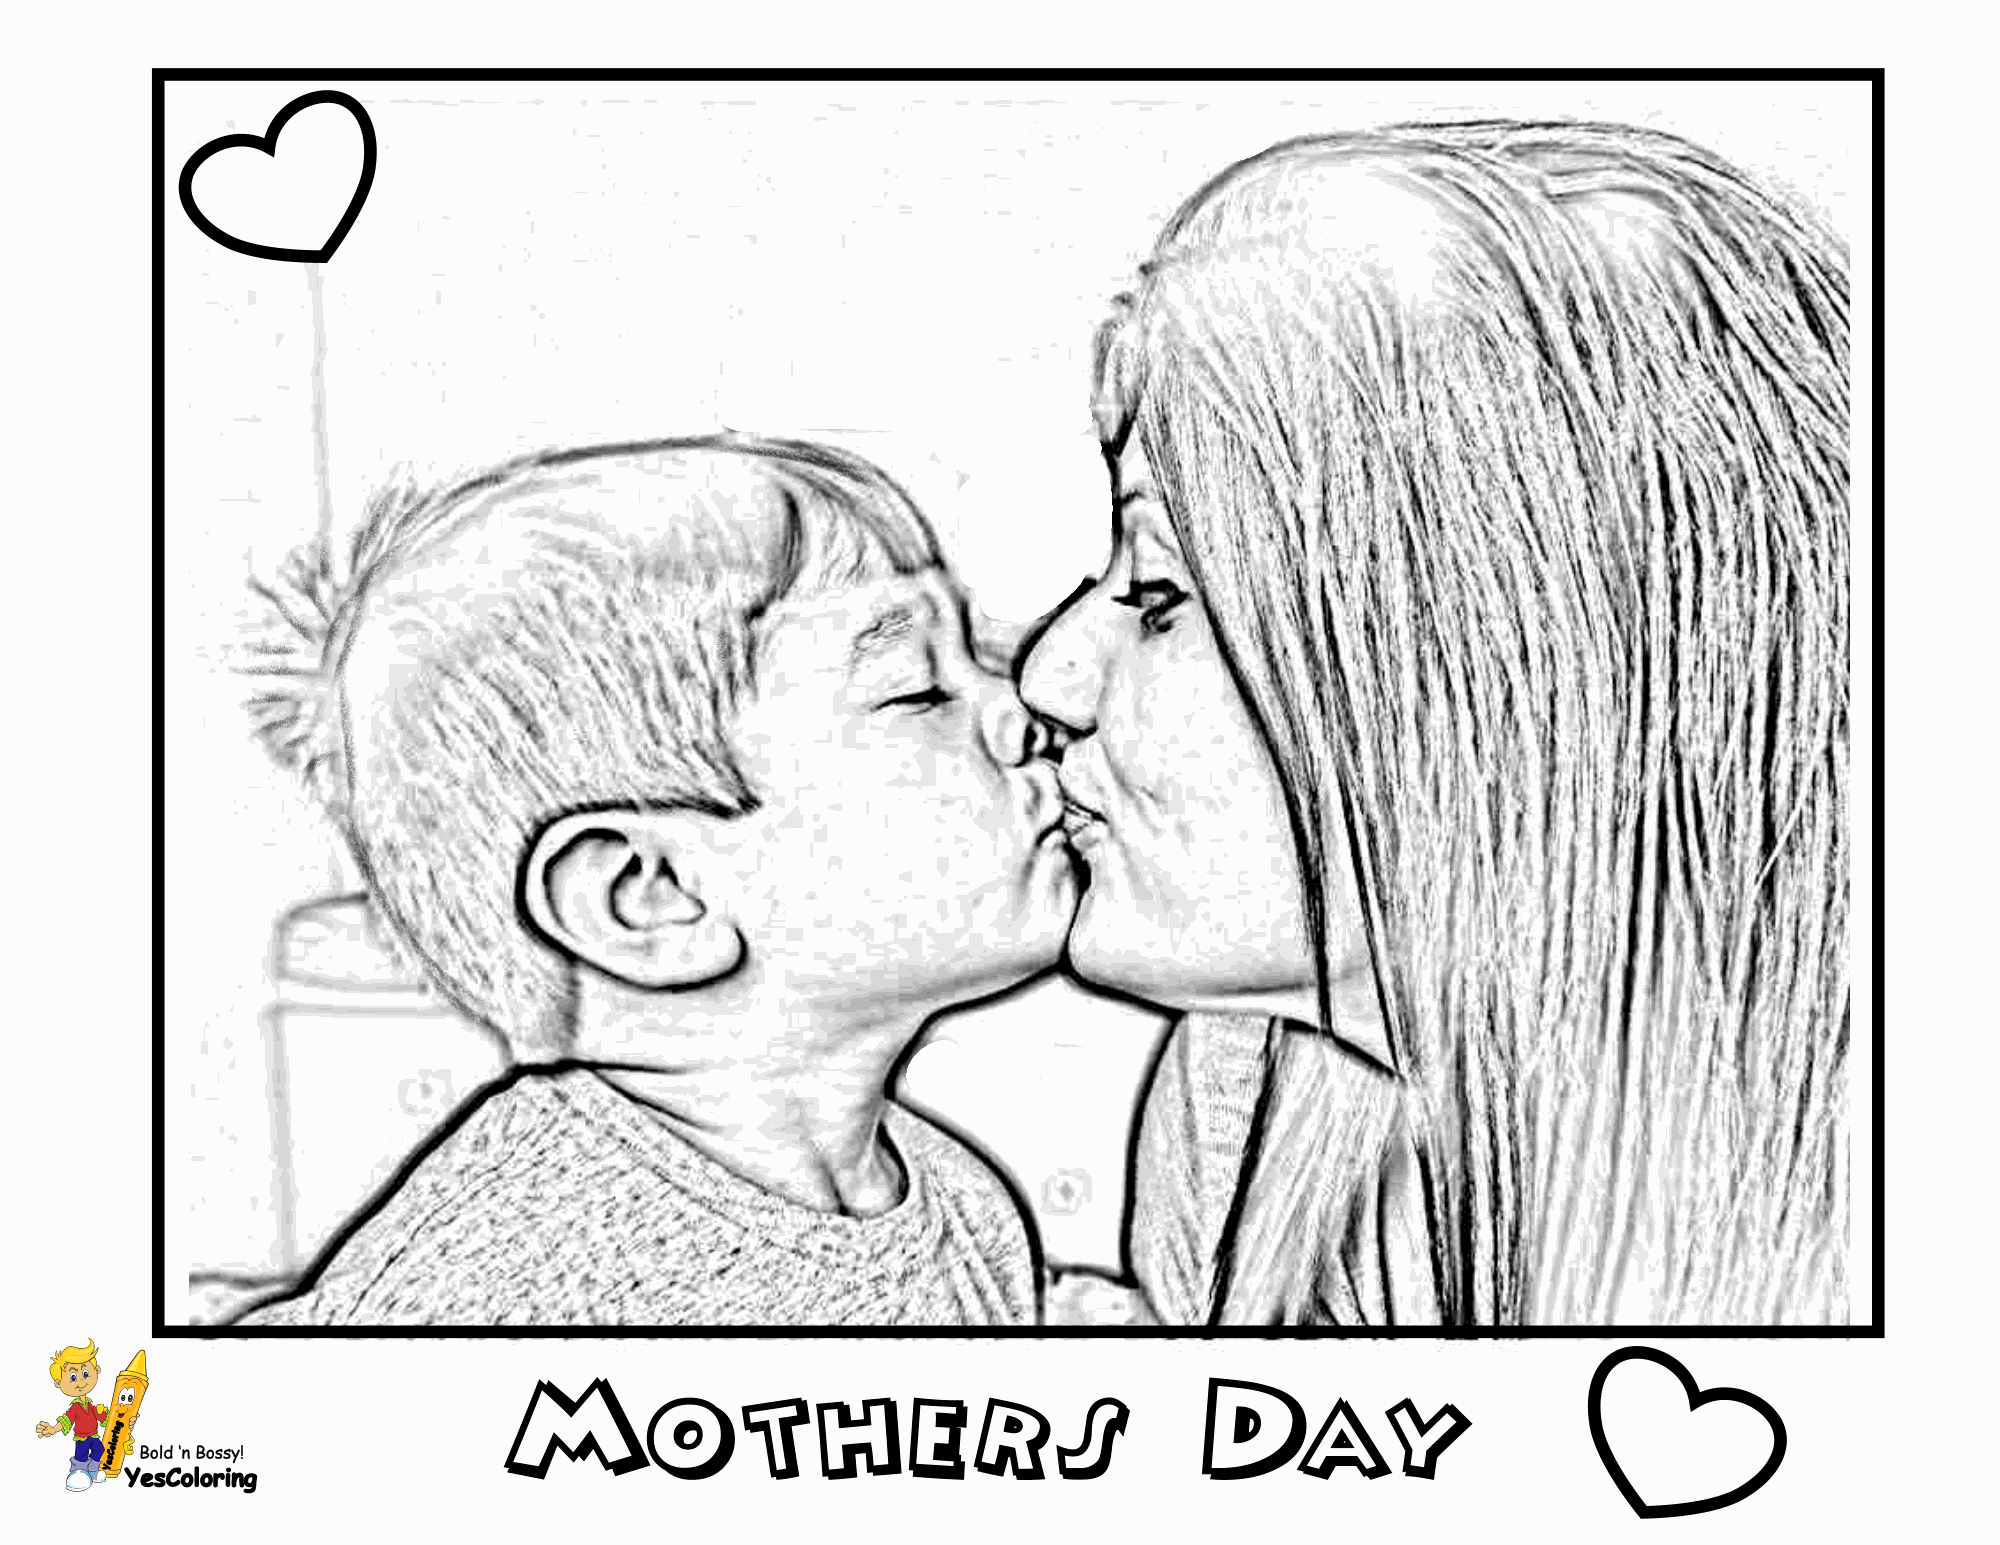 Marvelous Mothers Day Coloring Pages | YesColoring| Free | Mother